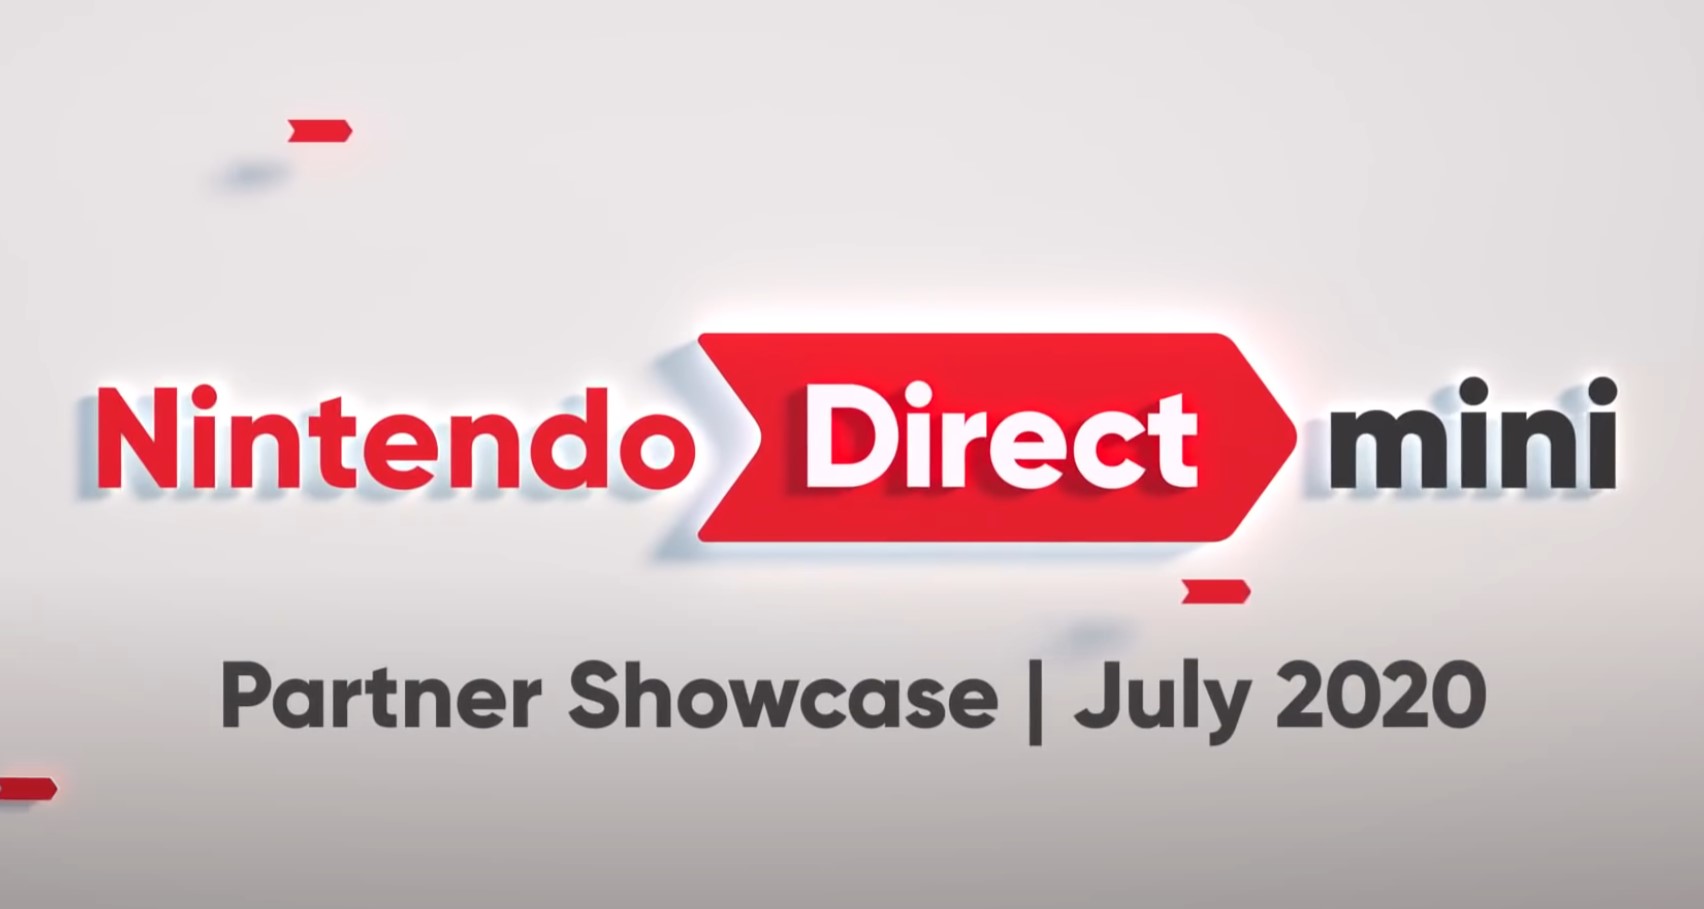 Another Nintendo Direct Could Be Happening Sooner Than Expected